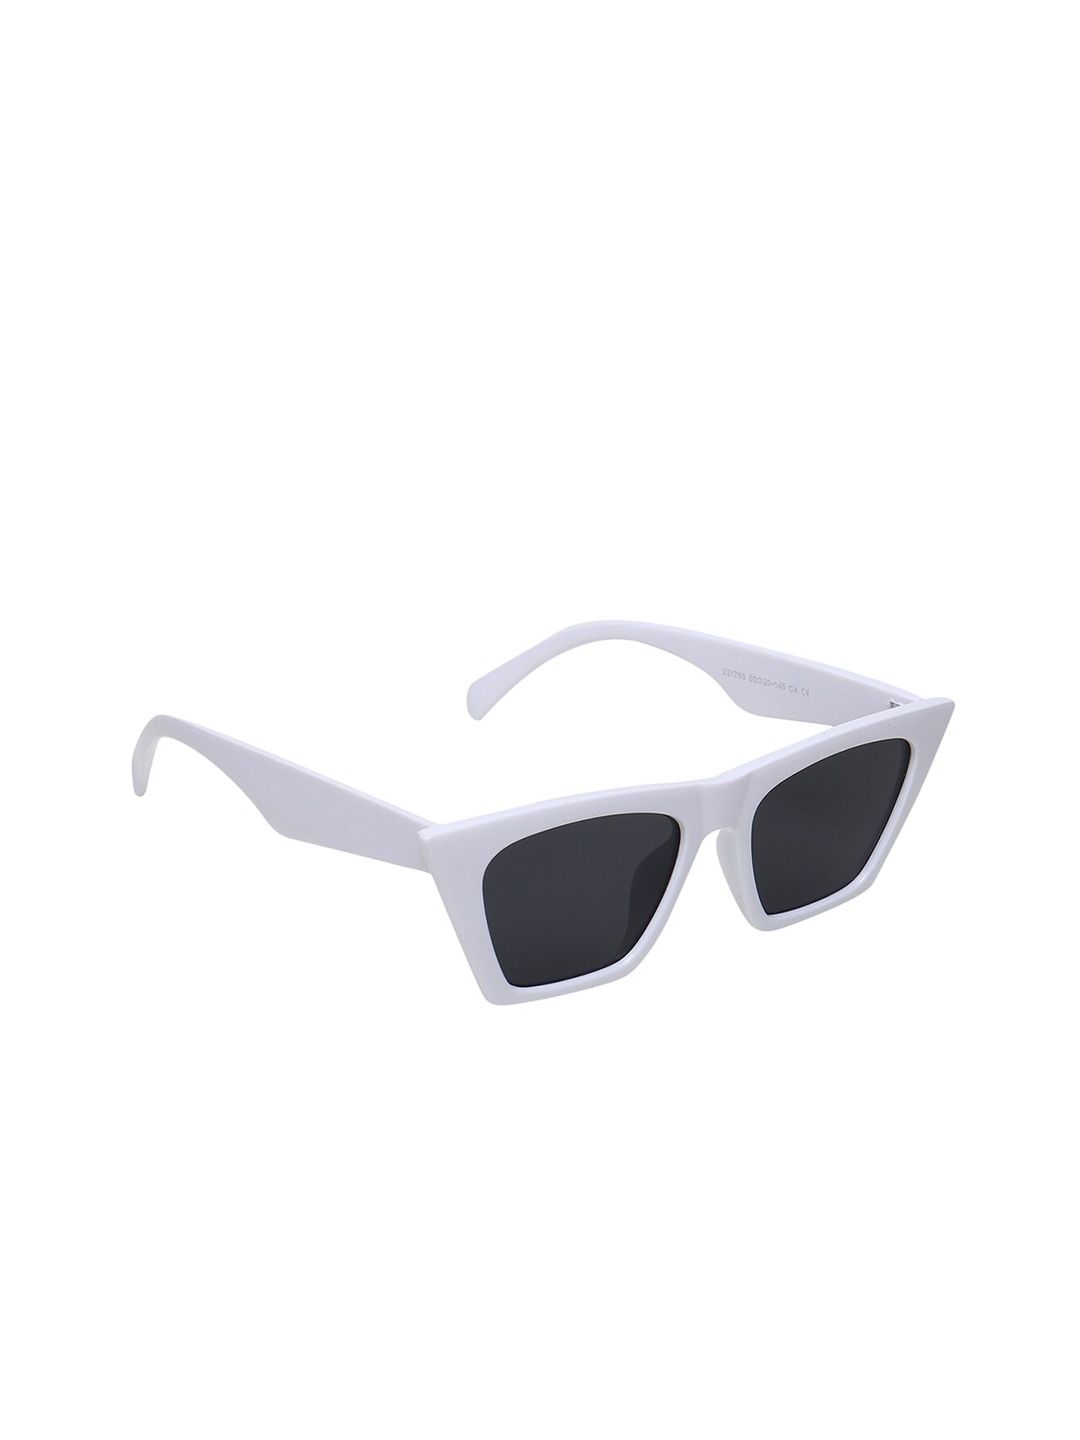 CRIBA Unisex Black Lens & White Cateye Sunglasses with UV Protected Lens Price in India